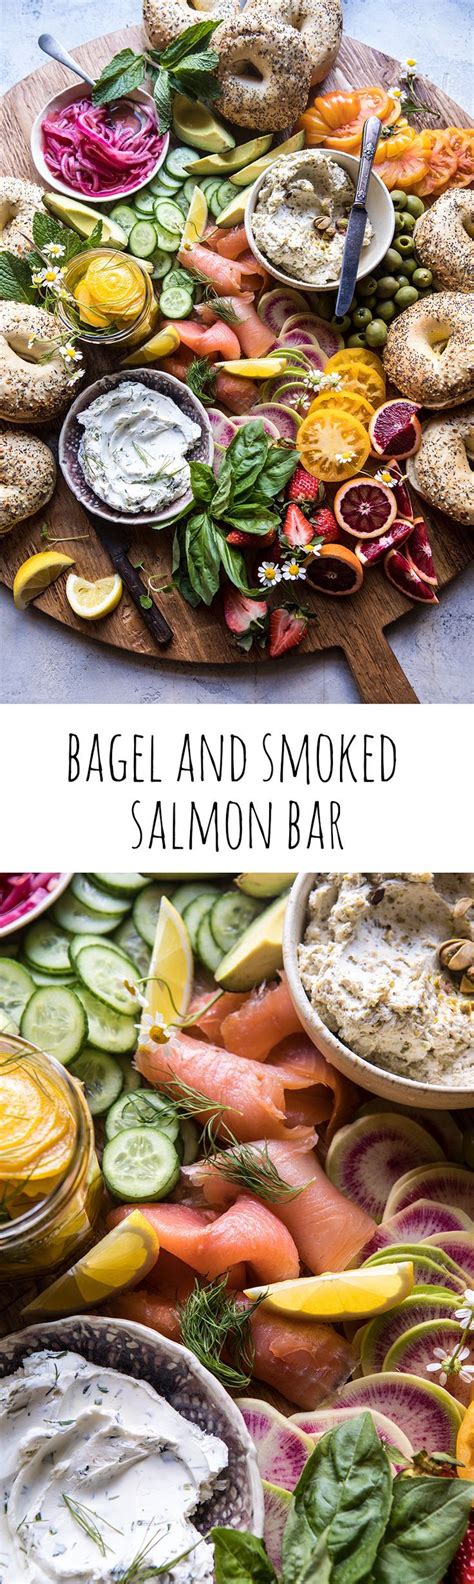 People all around the world enjoy the versatility of this smoked fish. Bagel and Smoked Salmon Bar | Recipe | Easter appetizers ...